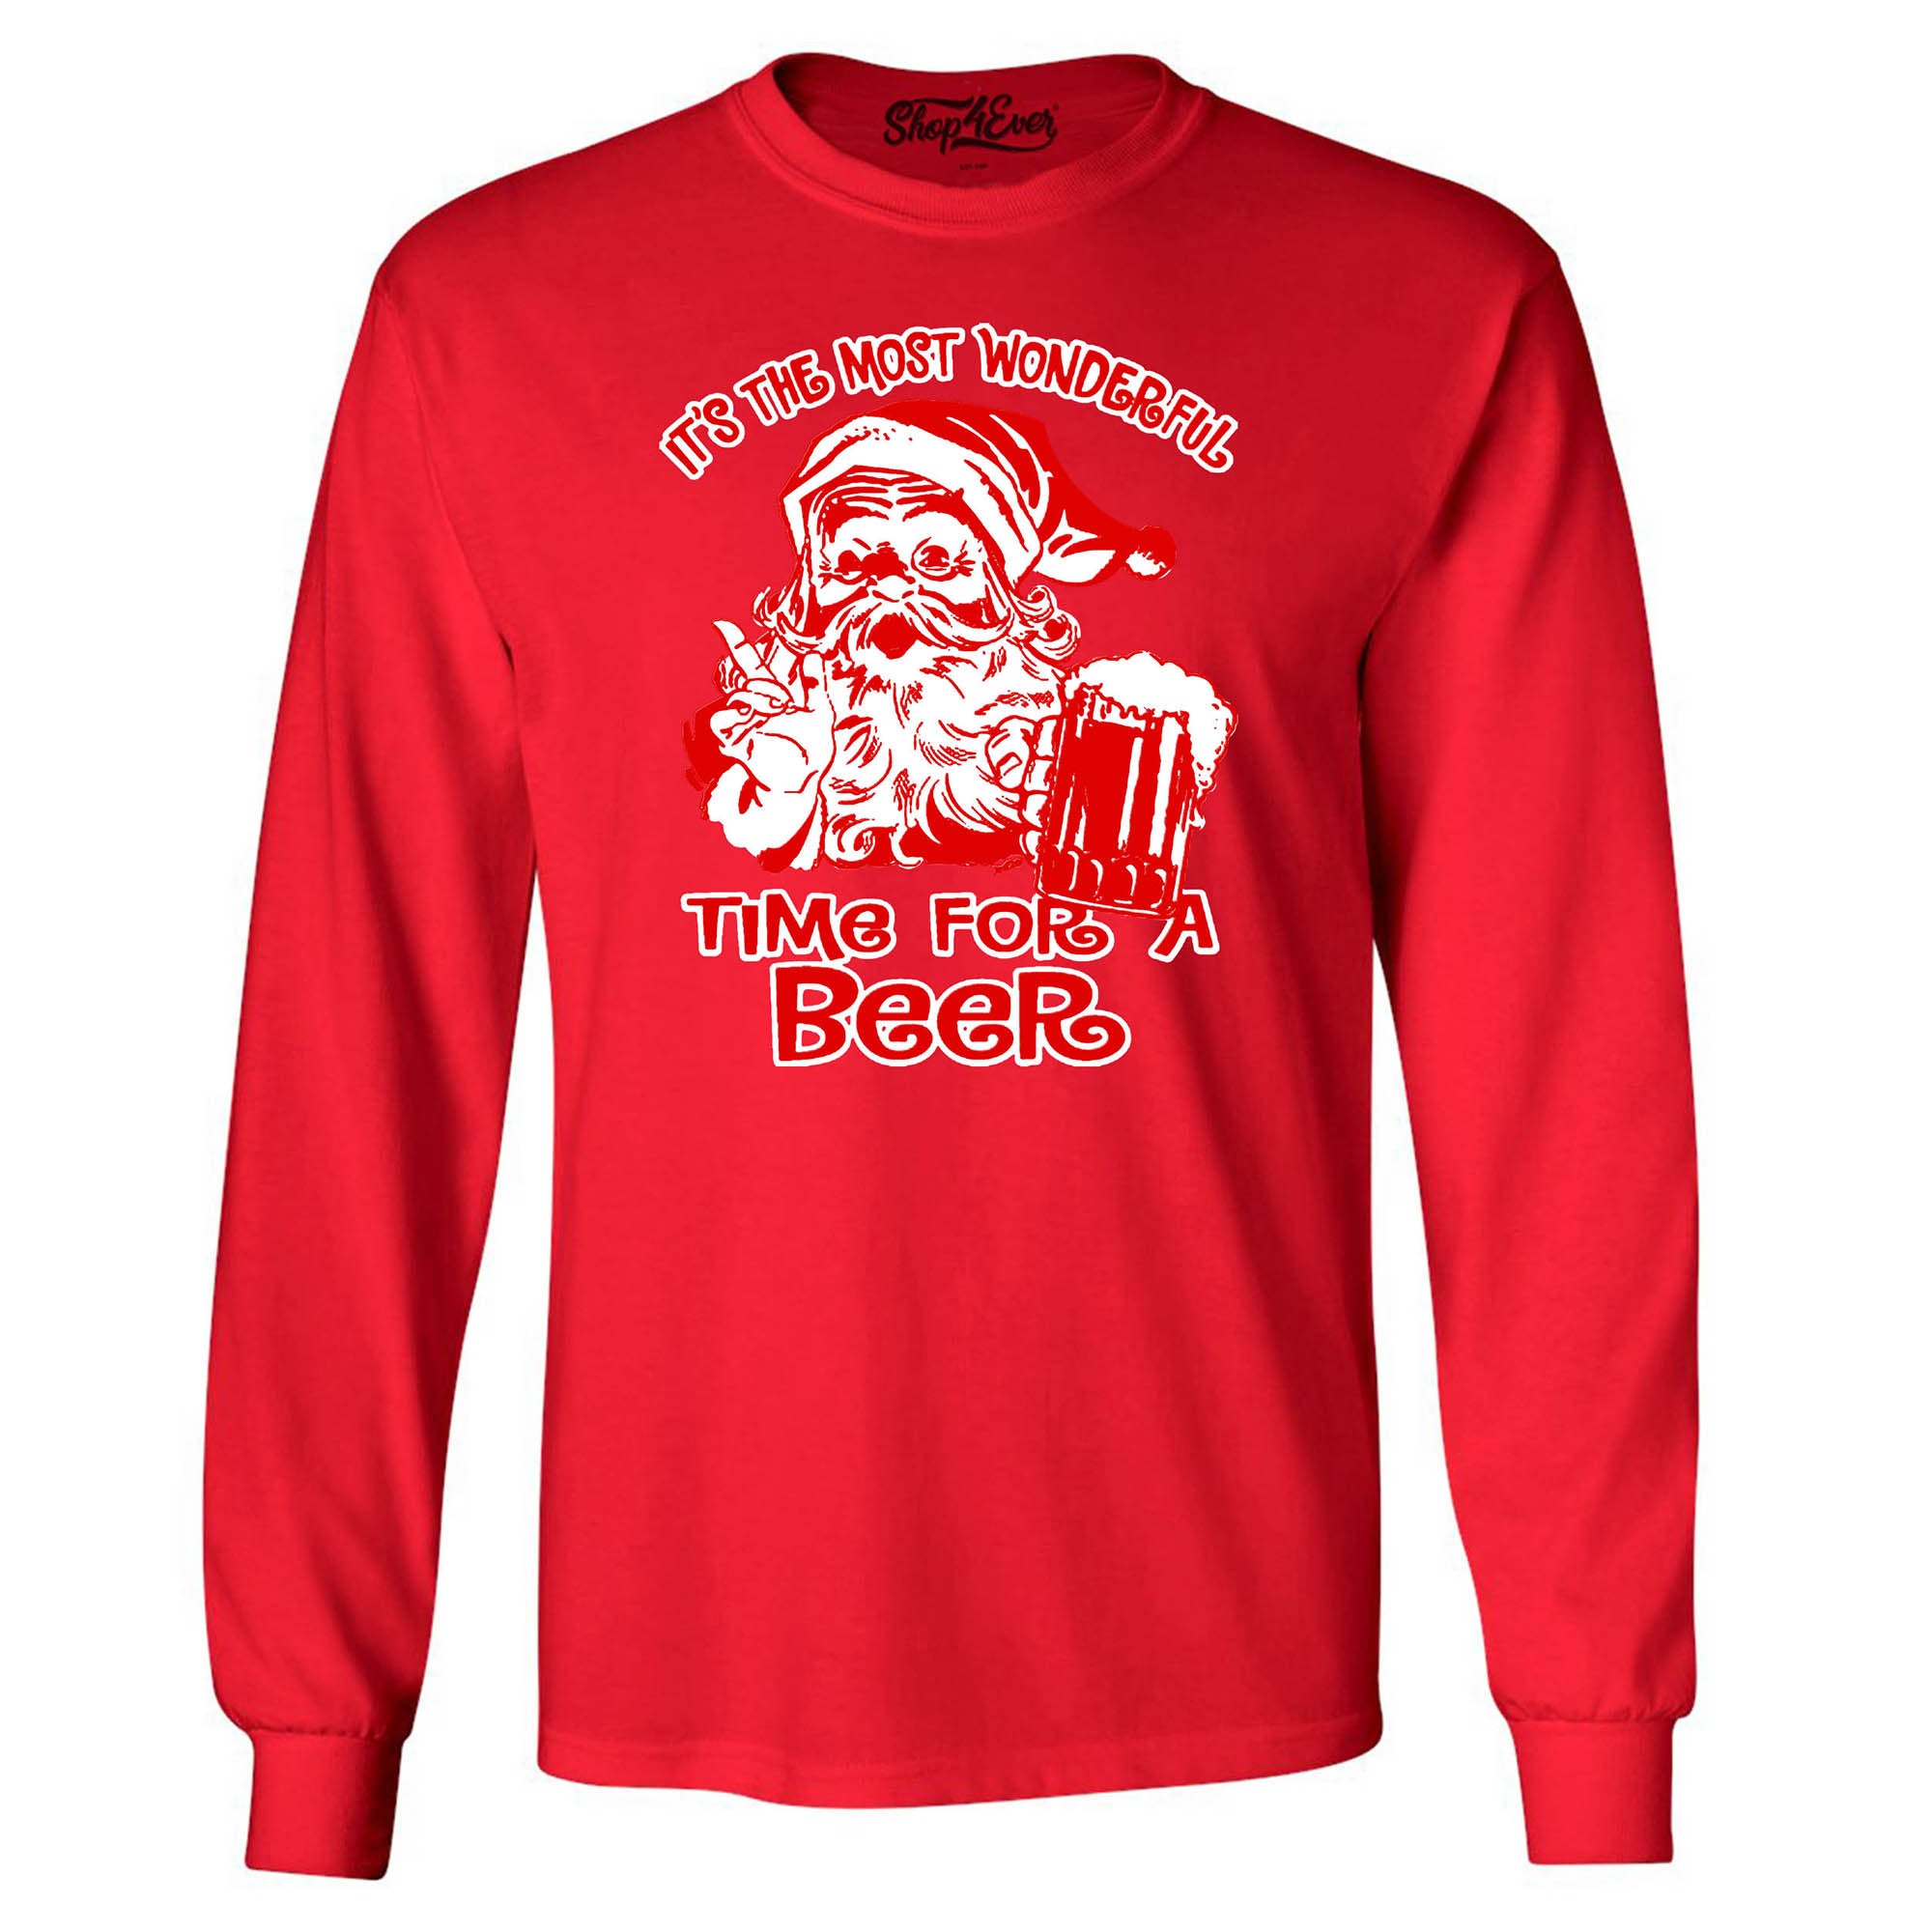 It's The Most Wonderful Time for a Beer Long Sleeve Shirt Christmas Shirts